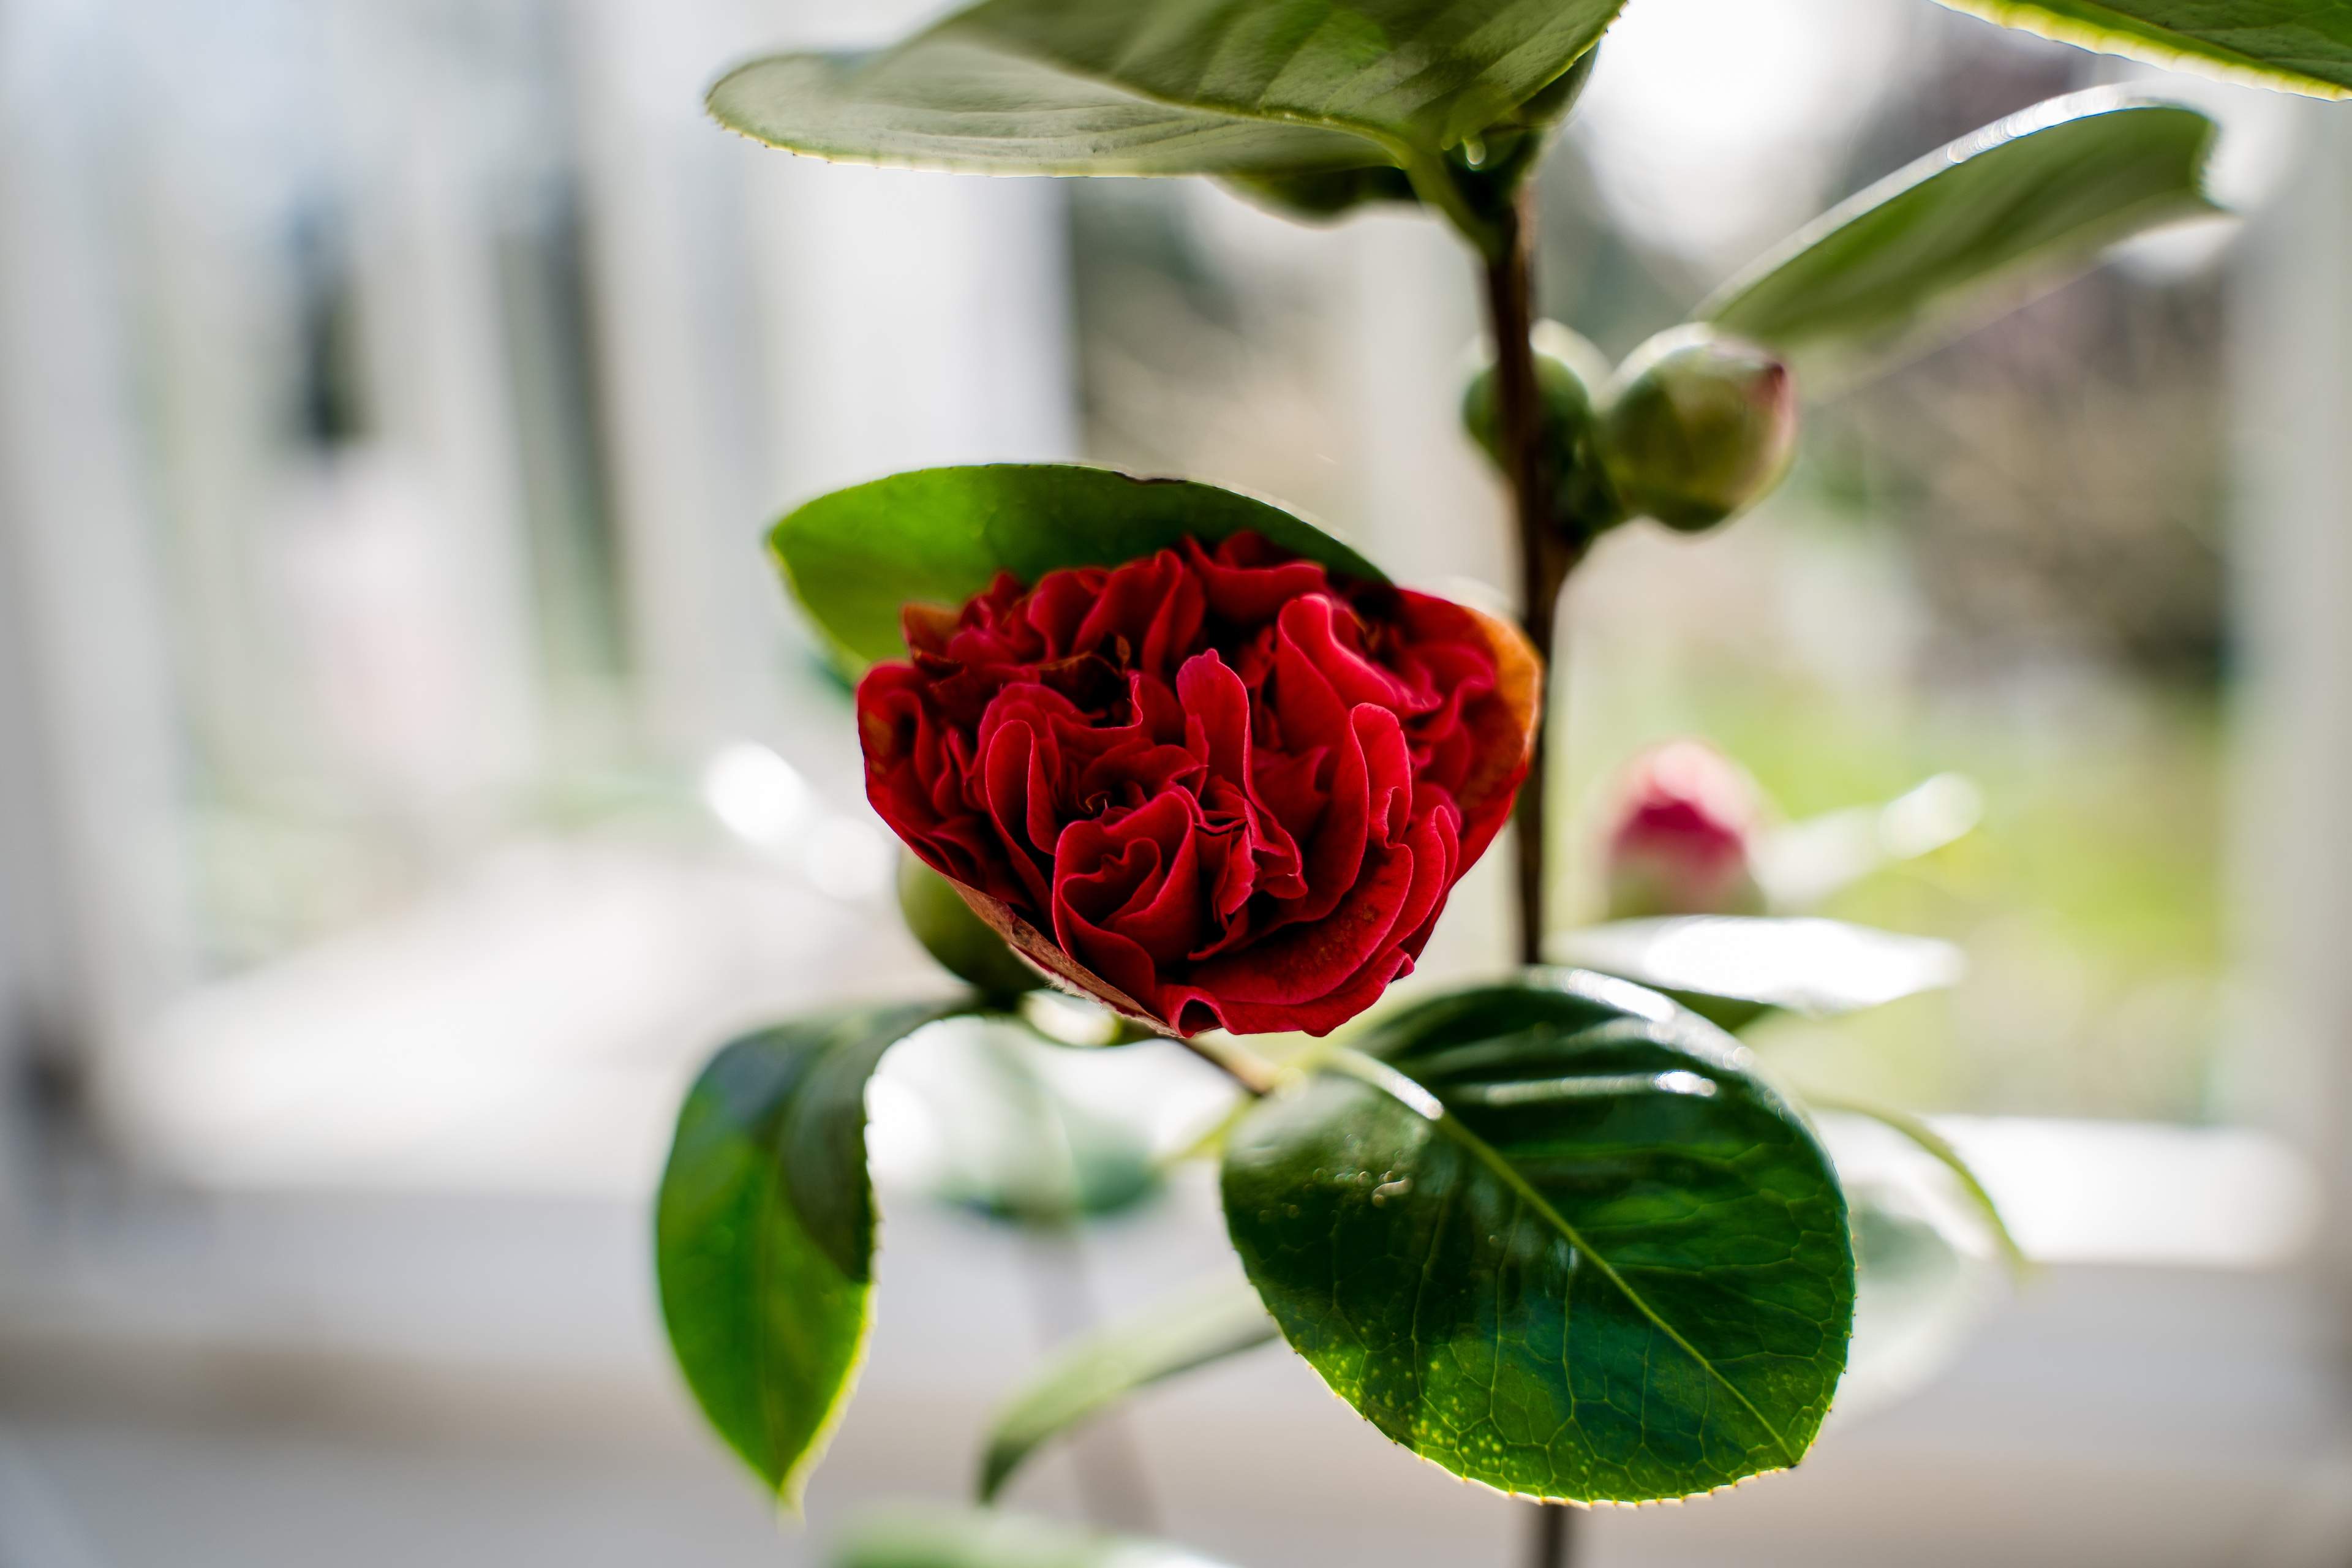 Red Camellia at Camellia Show, Chiswick House & Gardens, London, UK